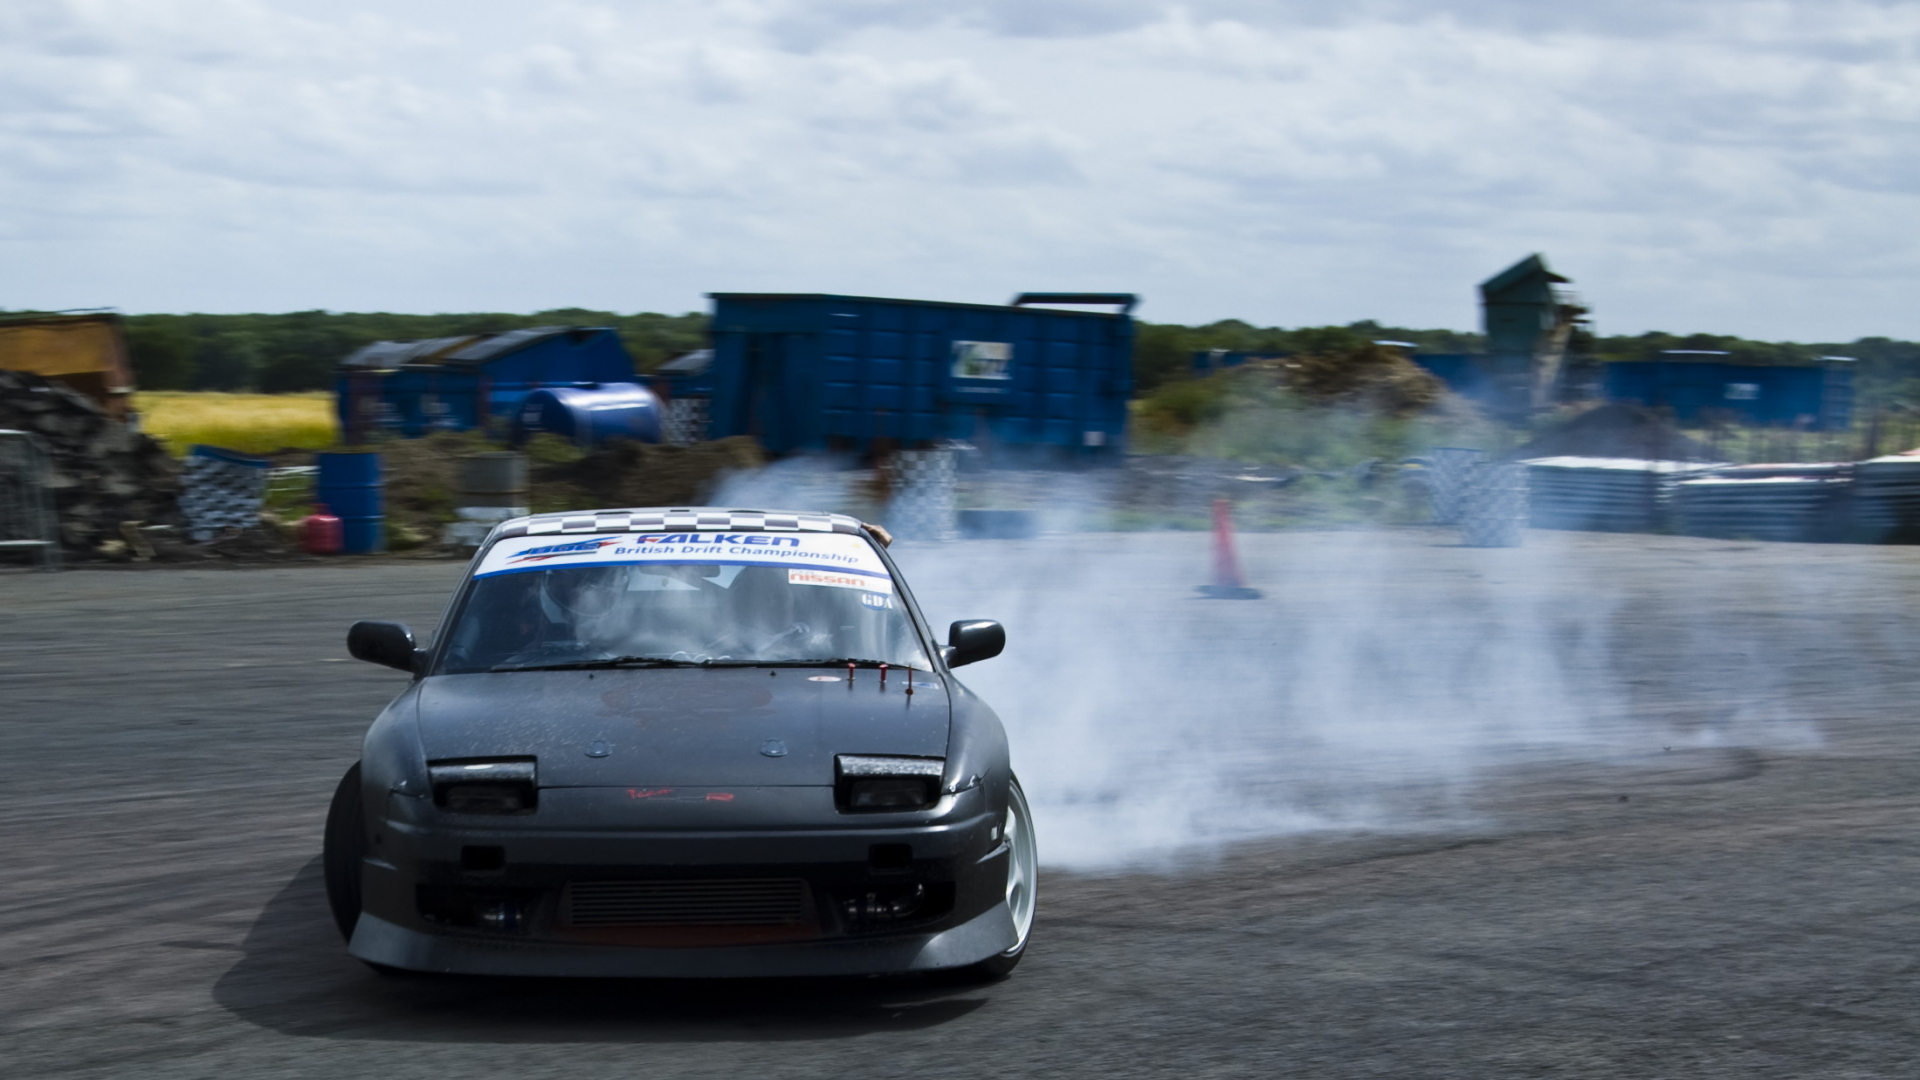 S13 Wallpaper Submited Image For Your